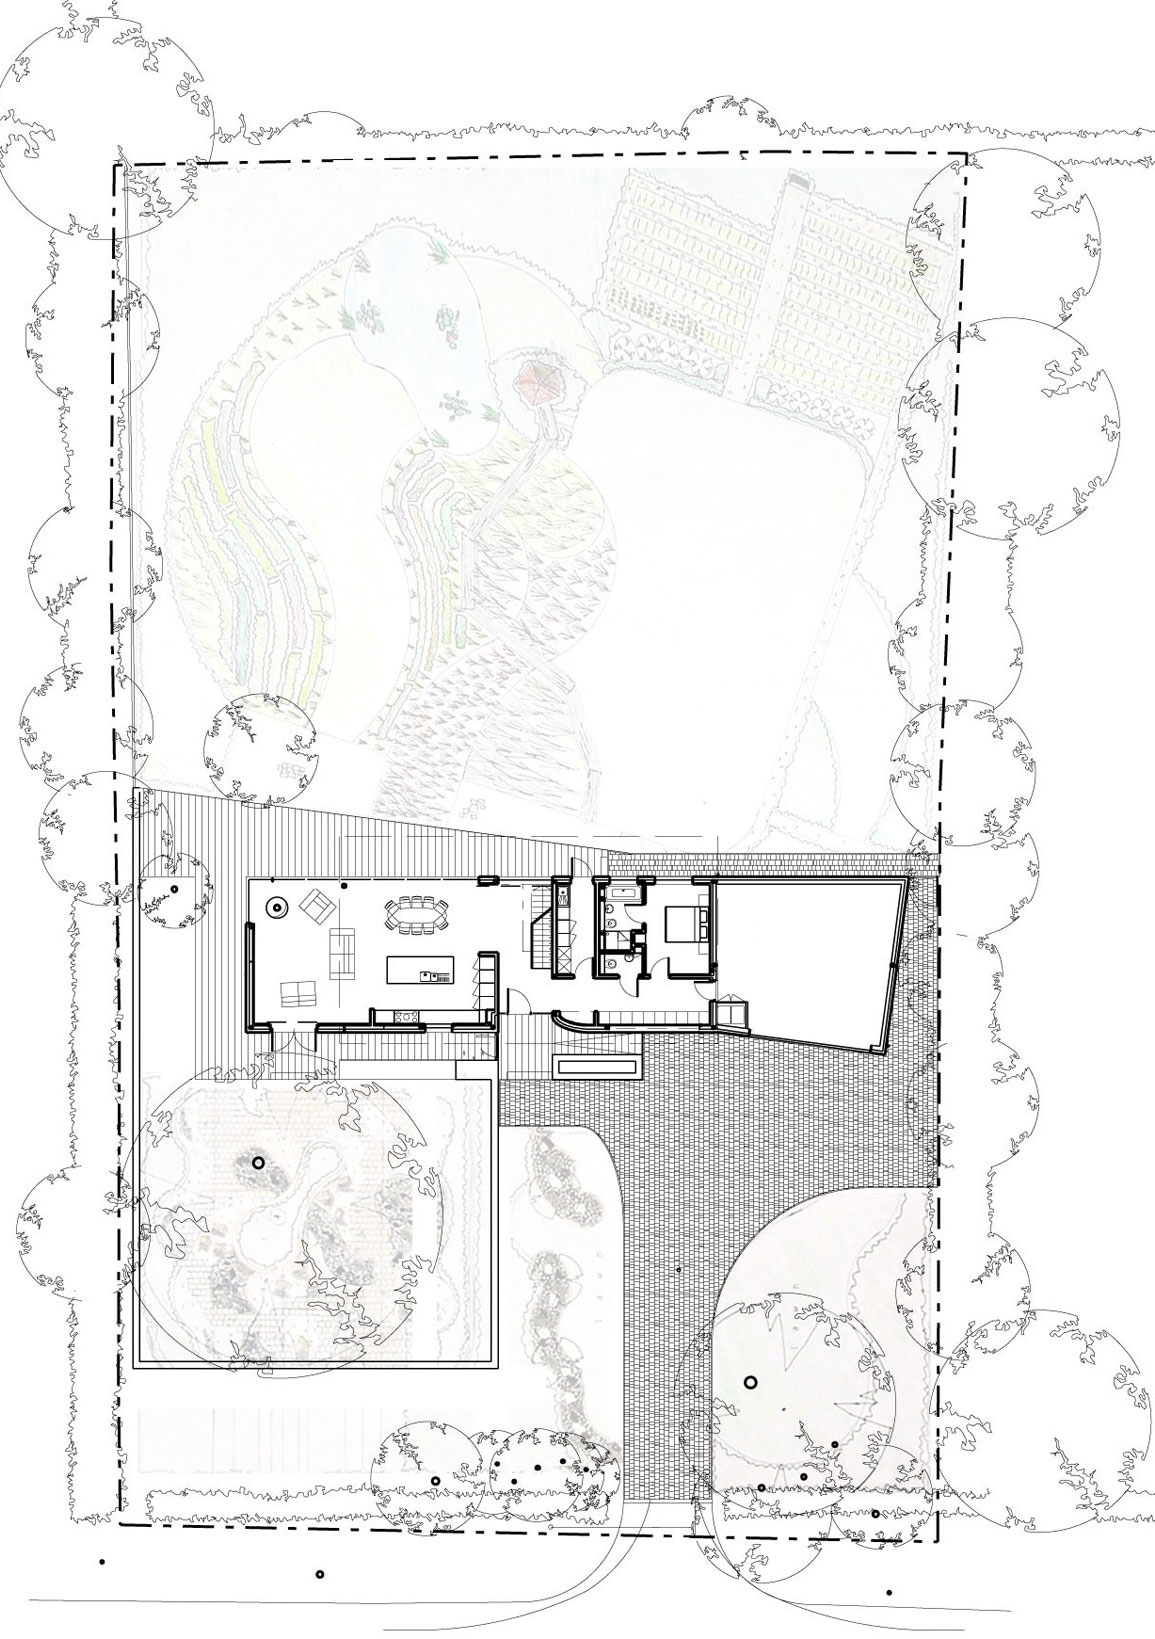 Plan Family House Site Plan Family Rustic Meadowview House Design Ideas By Platform 5 Architects Architecture Captivating Rustic Family Home Designed For A Retired Couple